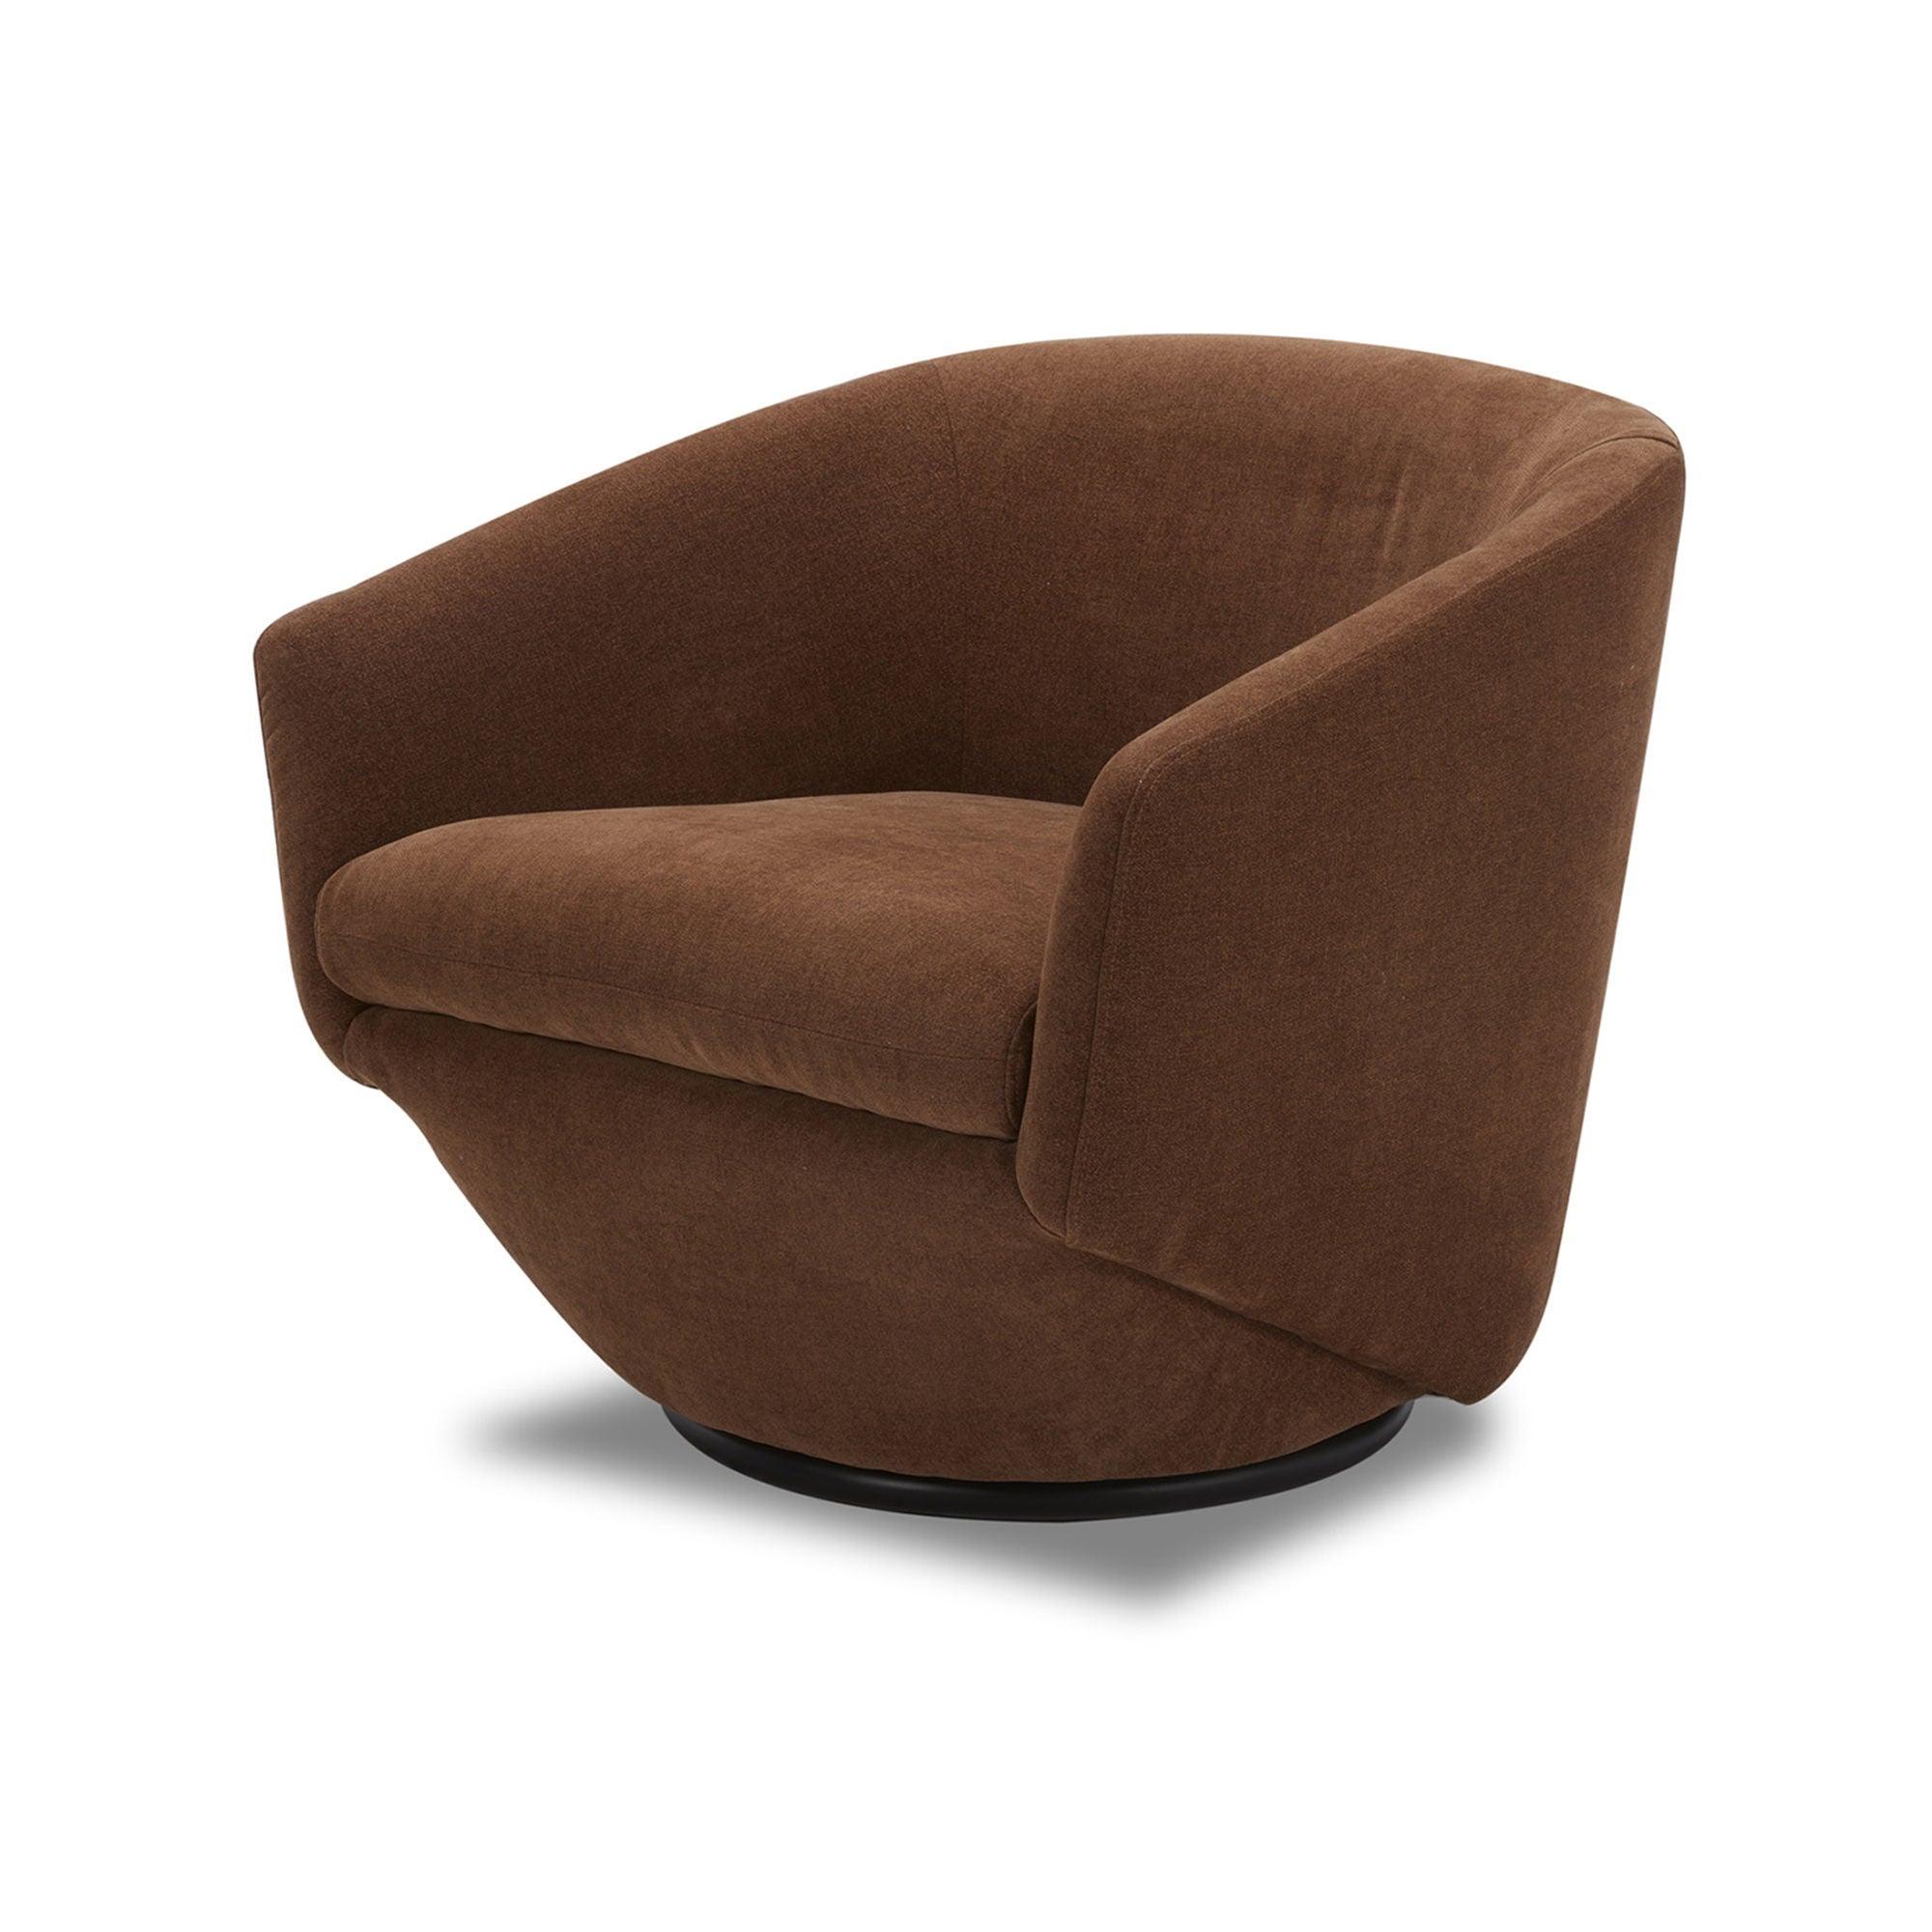 Parker Living - The Twist - Swivel Chair - Elise Rust - 5th Avenue Furniture